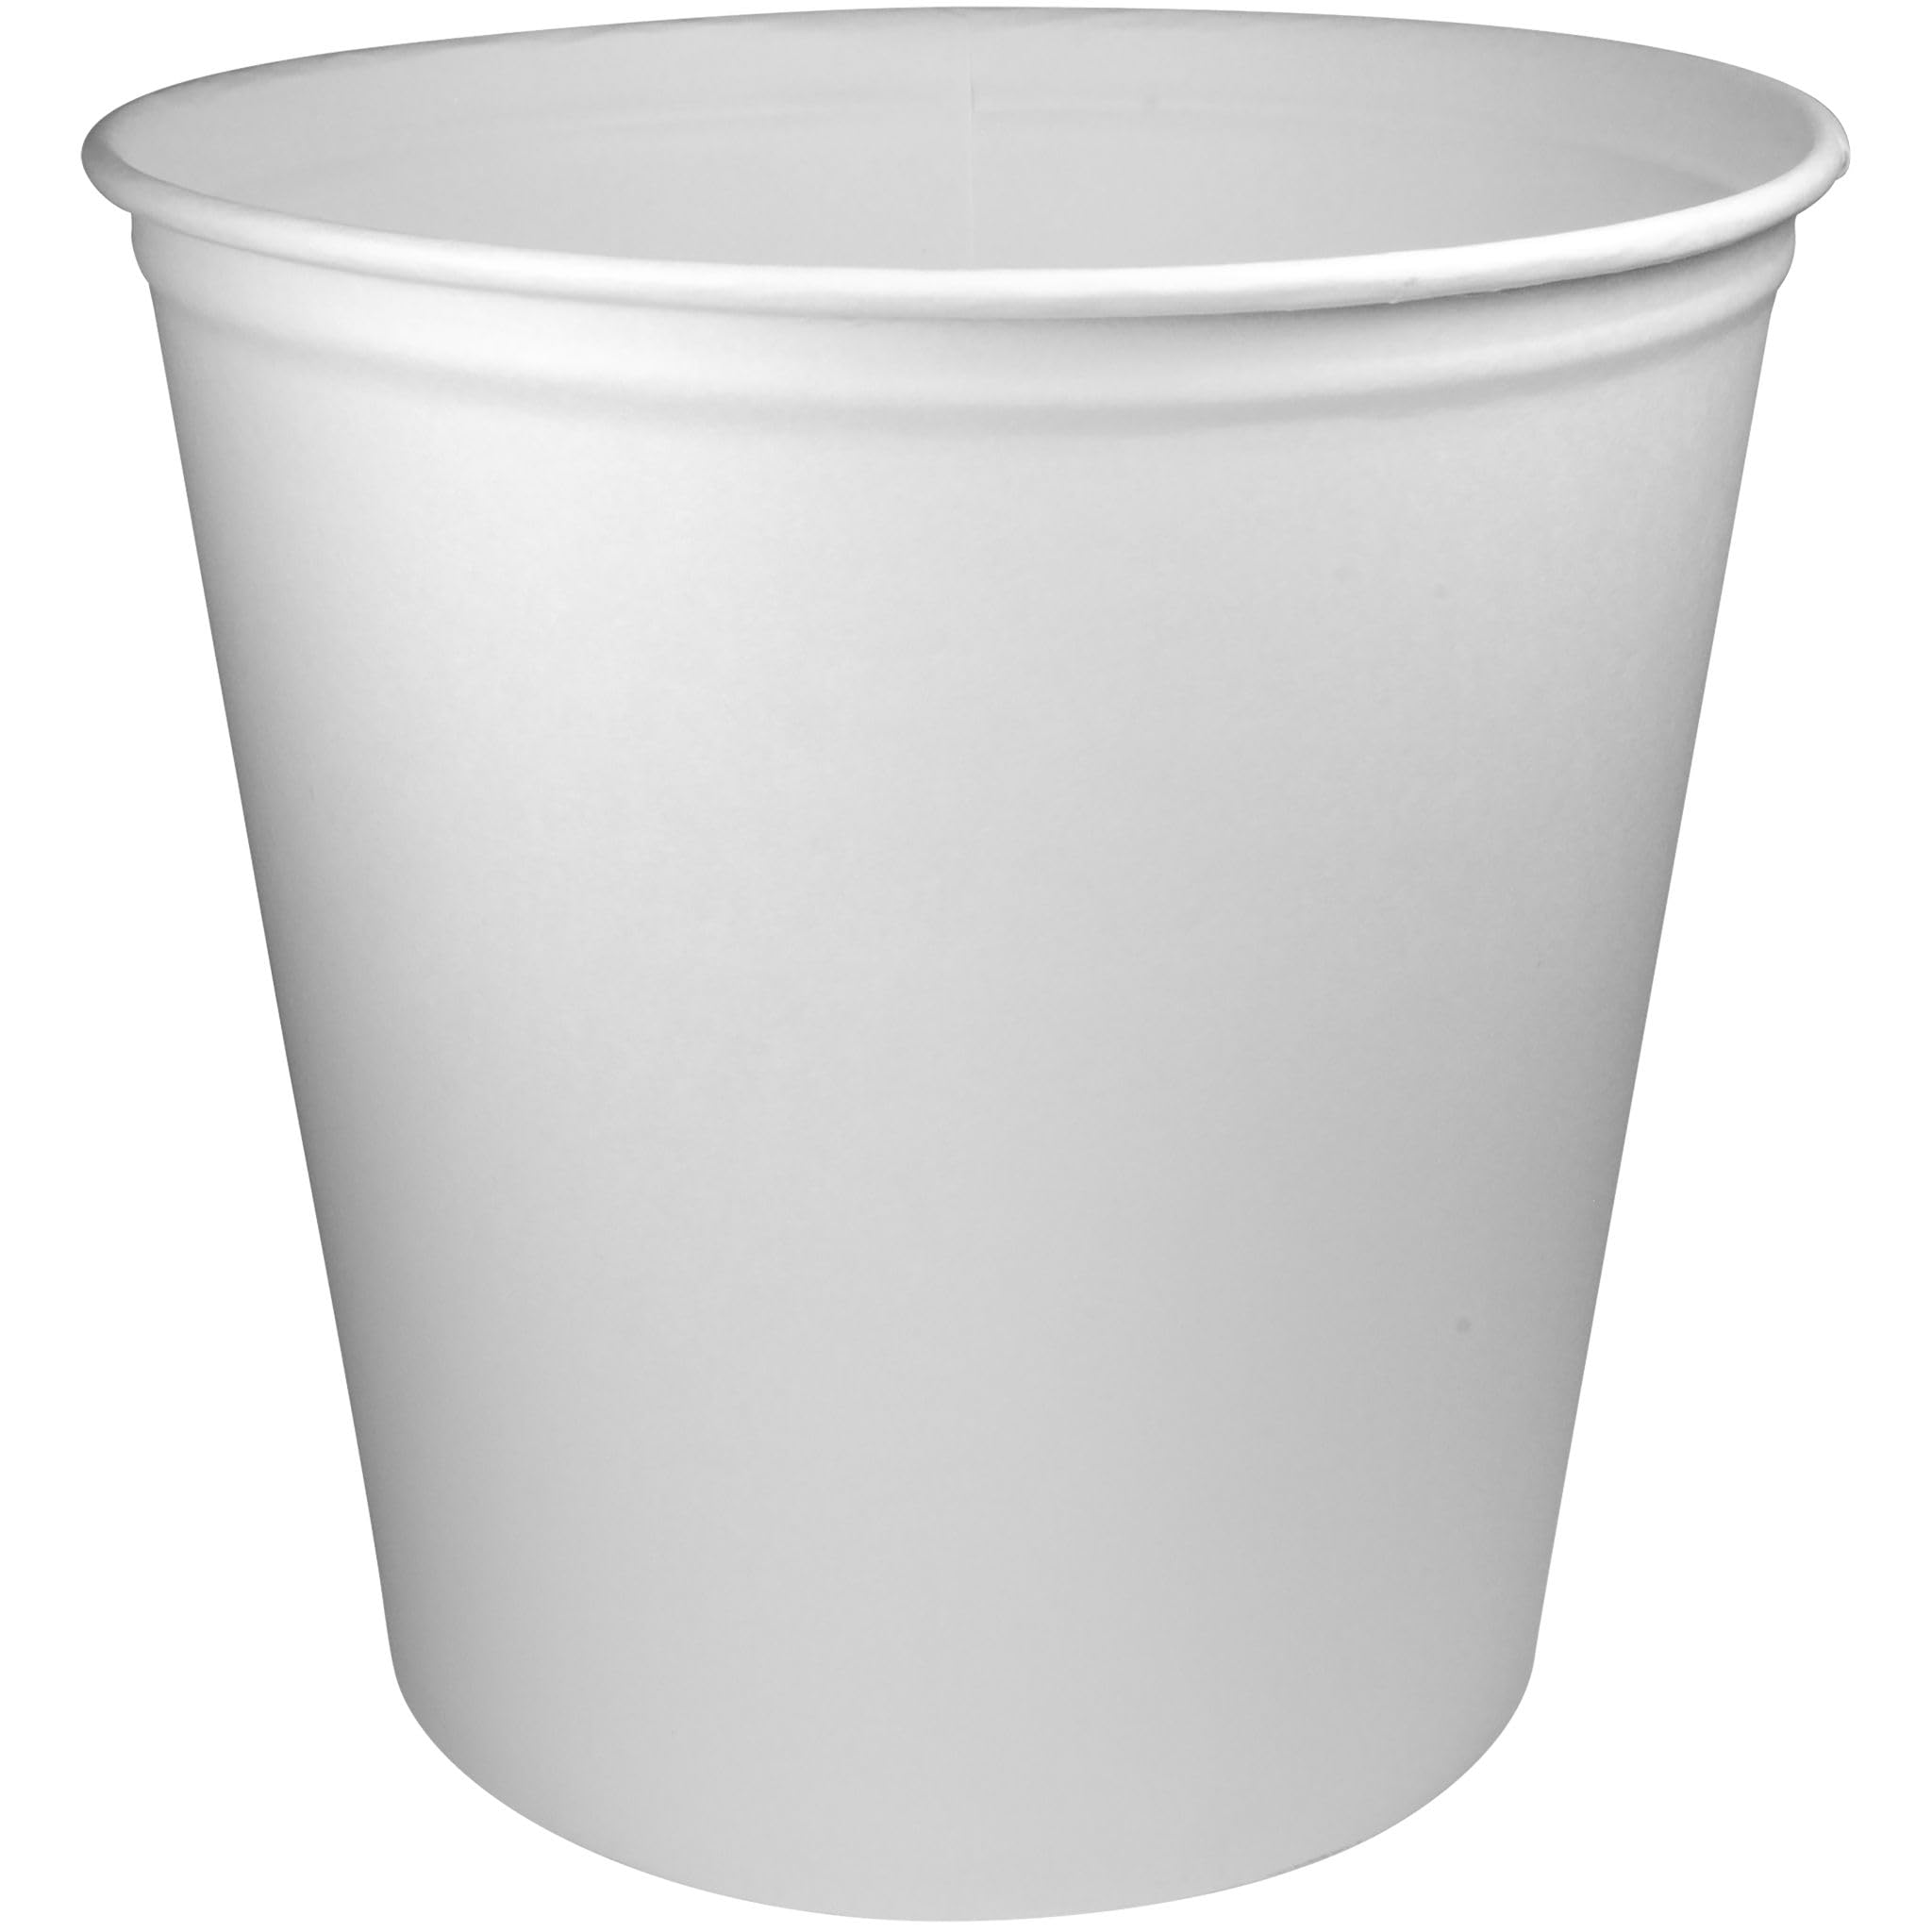 SOLO 10T1-N0198, 165oz Double Wrapped Paper Bucket, Unwaxed, White, 100/Carton, Sold As 1 Carton